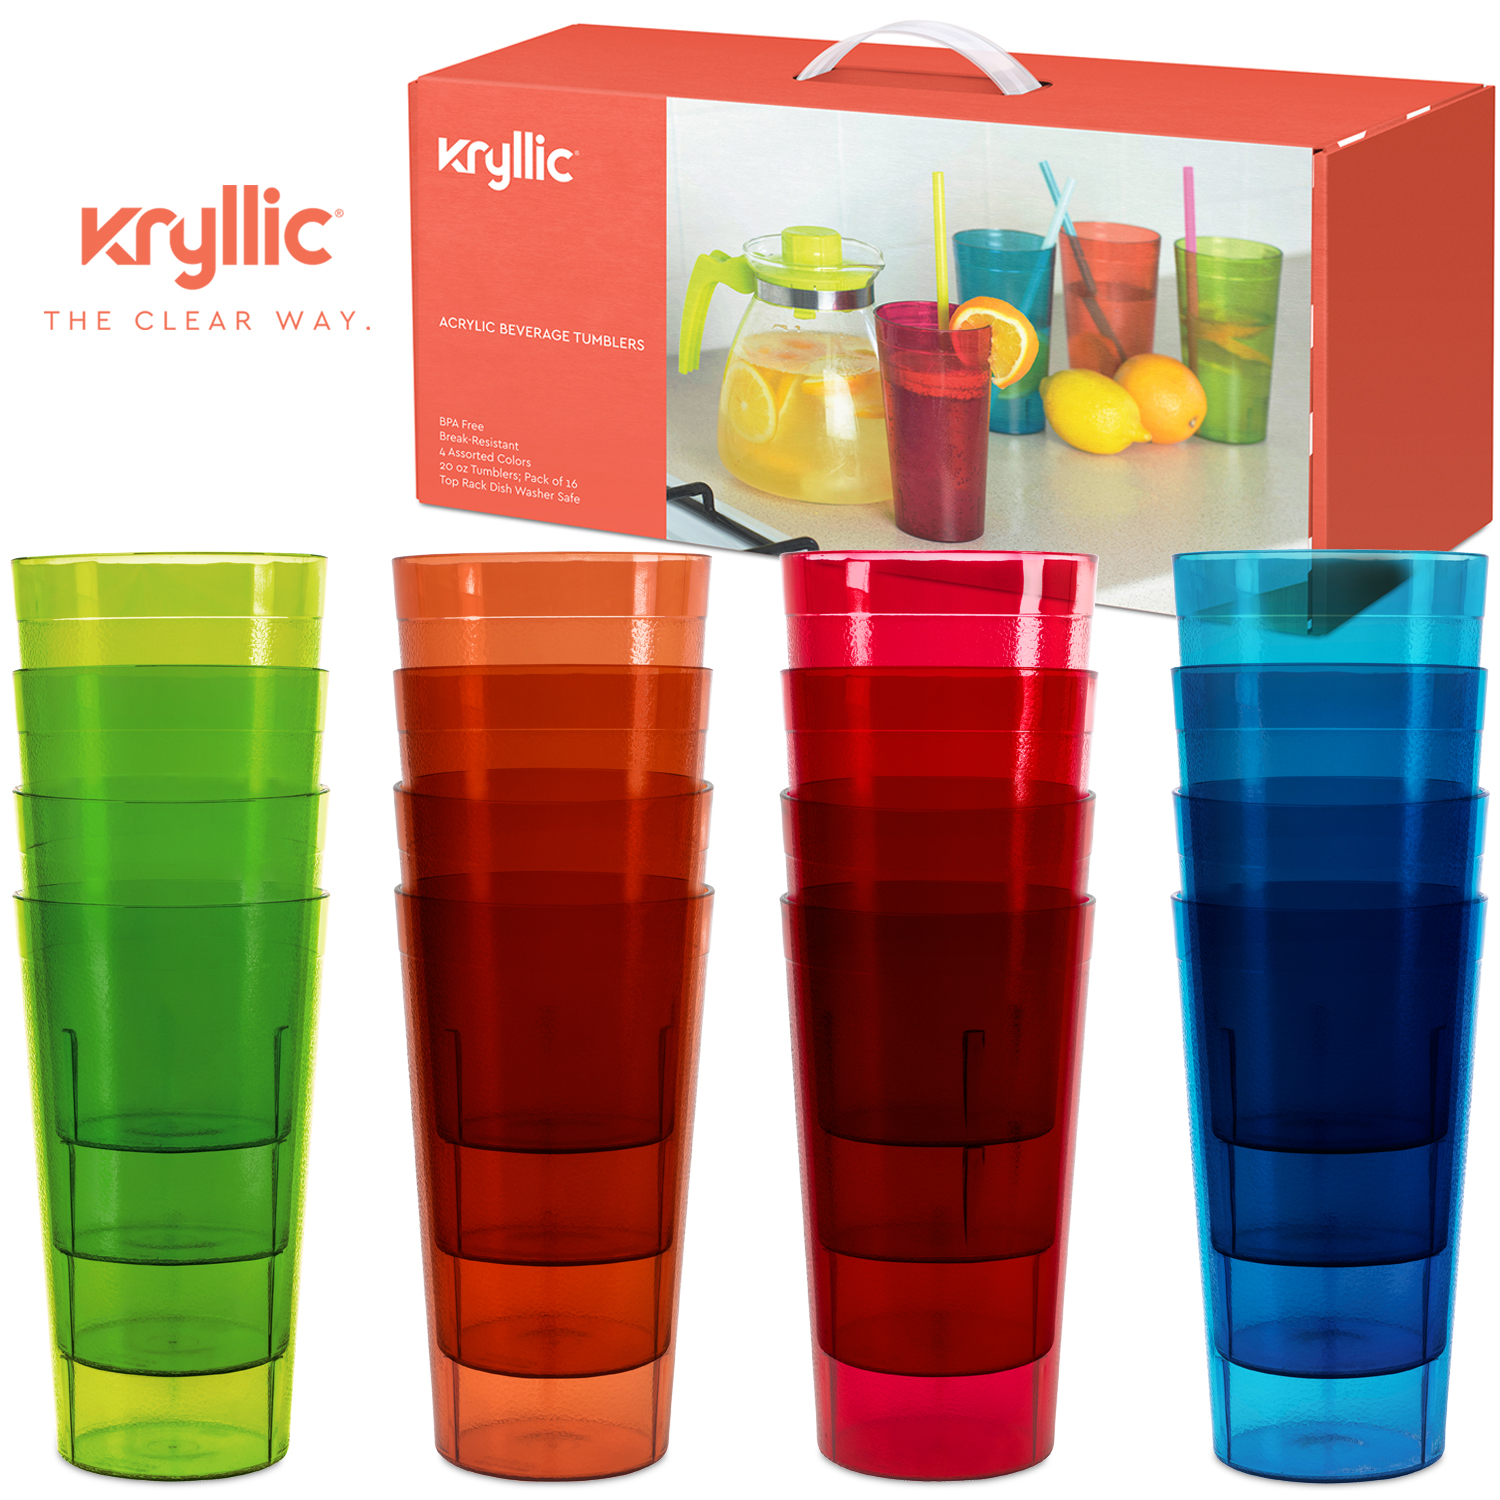 Plastic Cup Tumblers Drinkware Glasses - Break Resistant 20 oz. Kitchen Restaurant High Quality Set of 16 in 4 Assorted Colors - Best Gift Idea By Kryllic - image 1 of 11